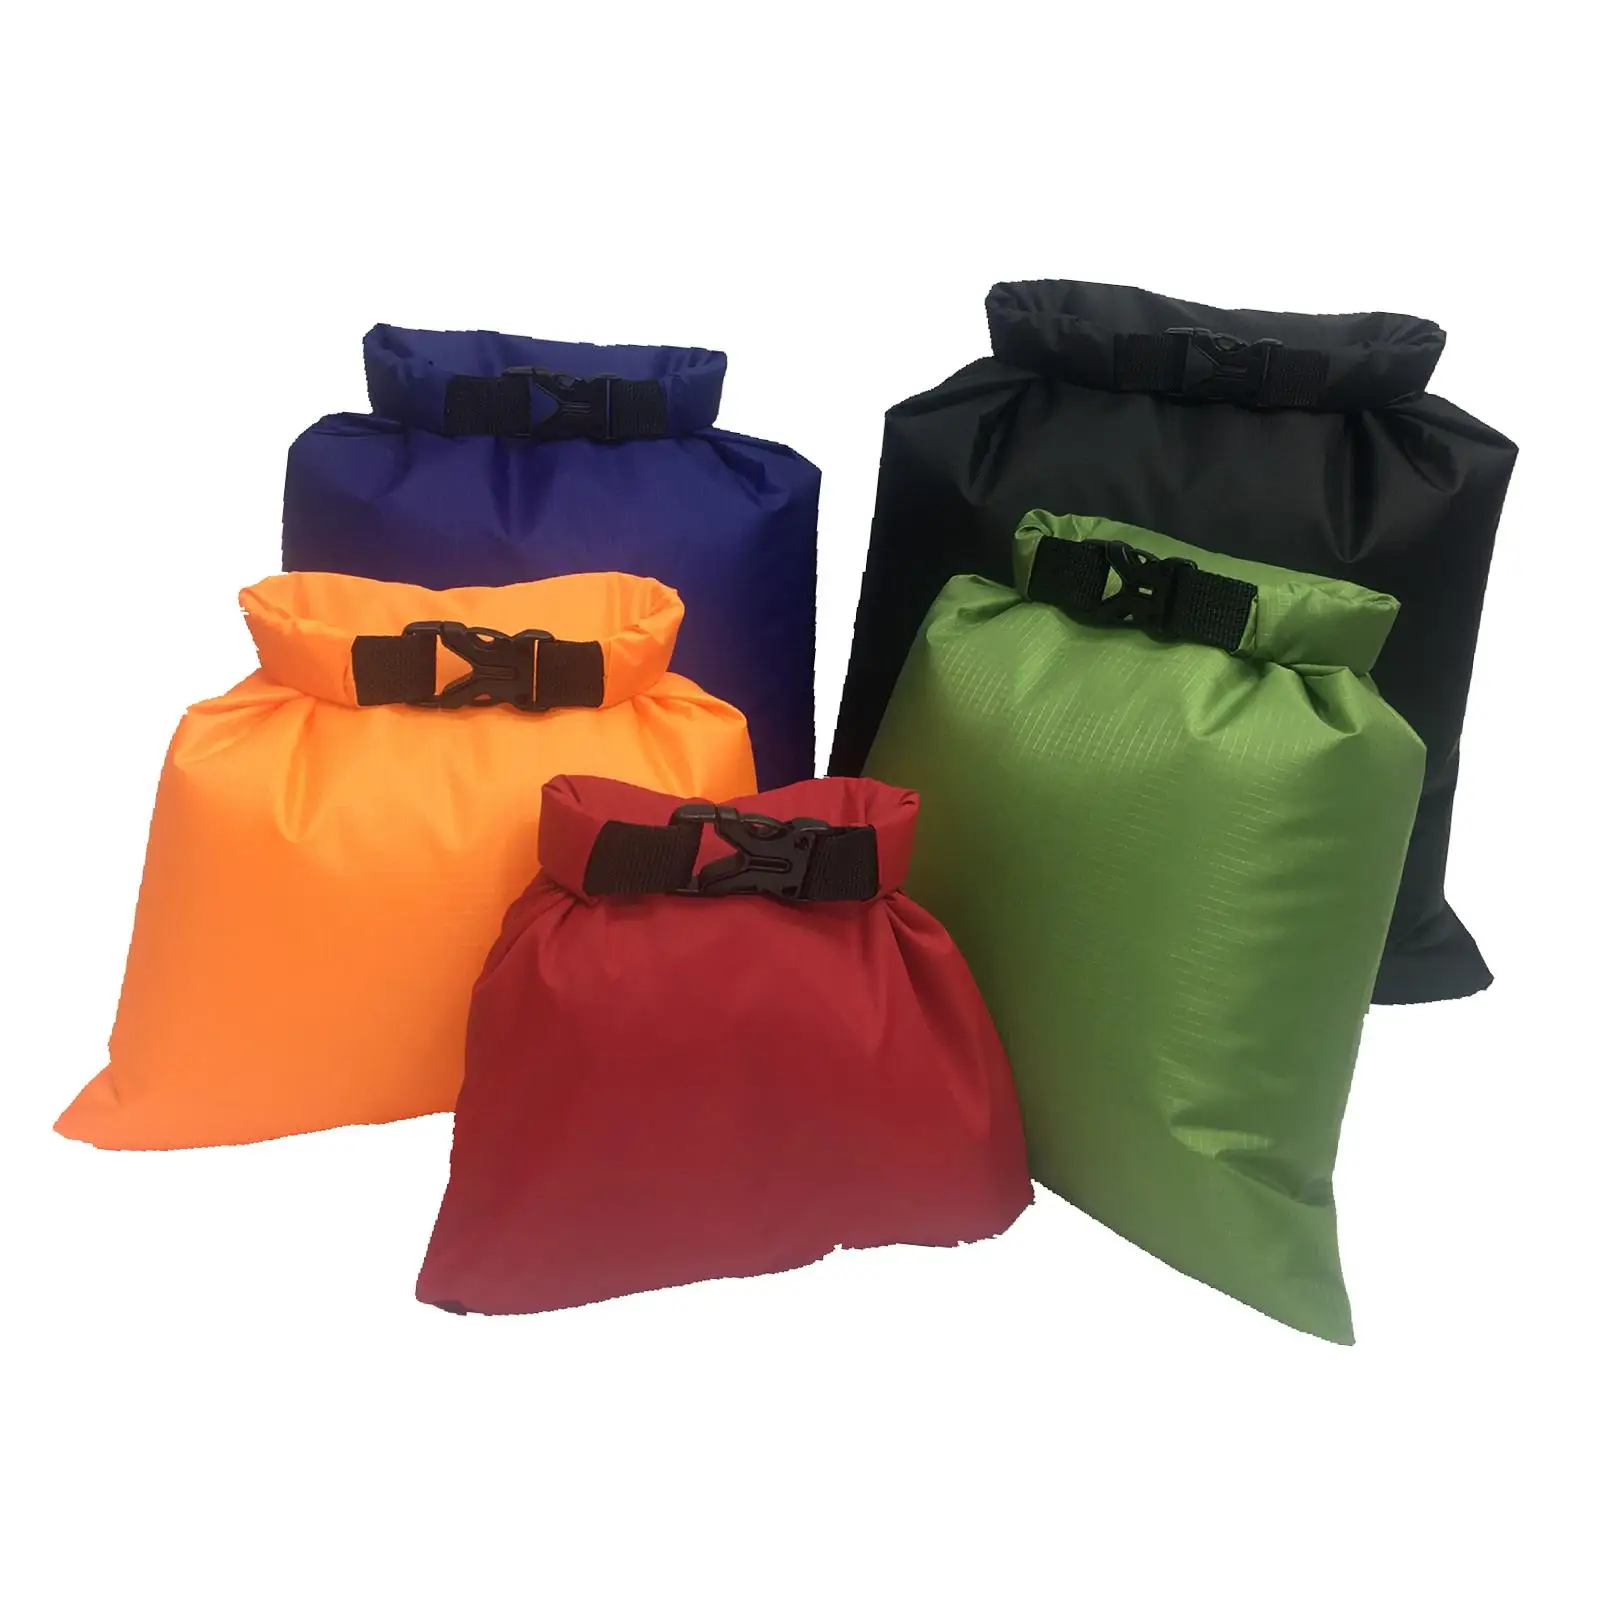 5Pcs Dry Bag Waterproof Bag Set Accessory Sturdy Versatile Outdoor Combo Pouch Multiple Sizes for Camping Hiking Boating Rafting